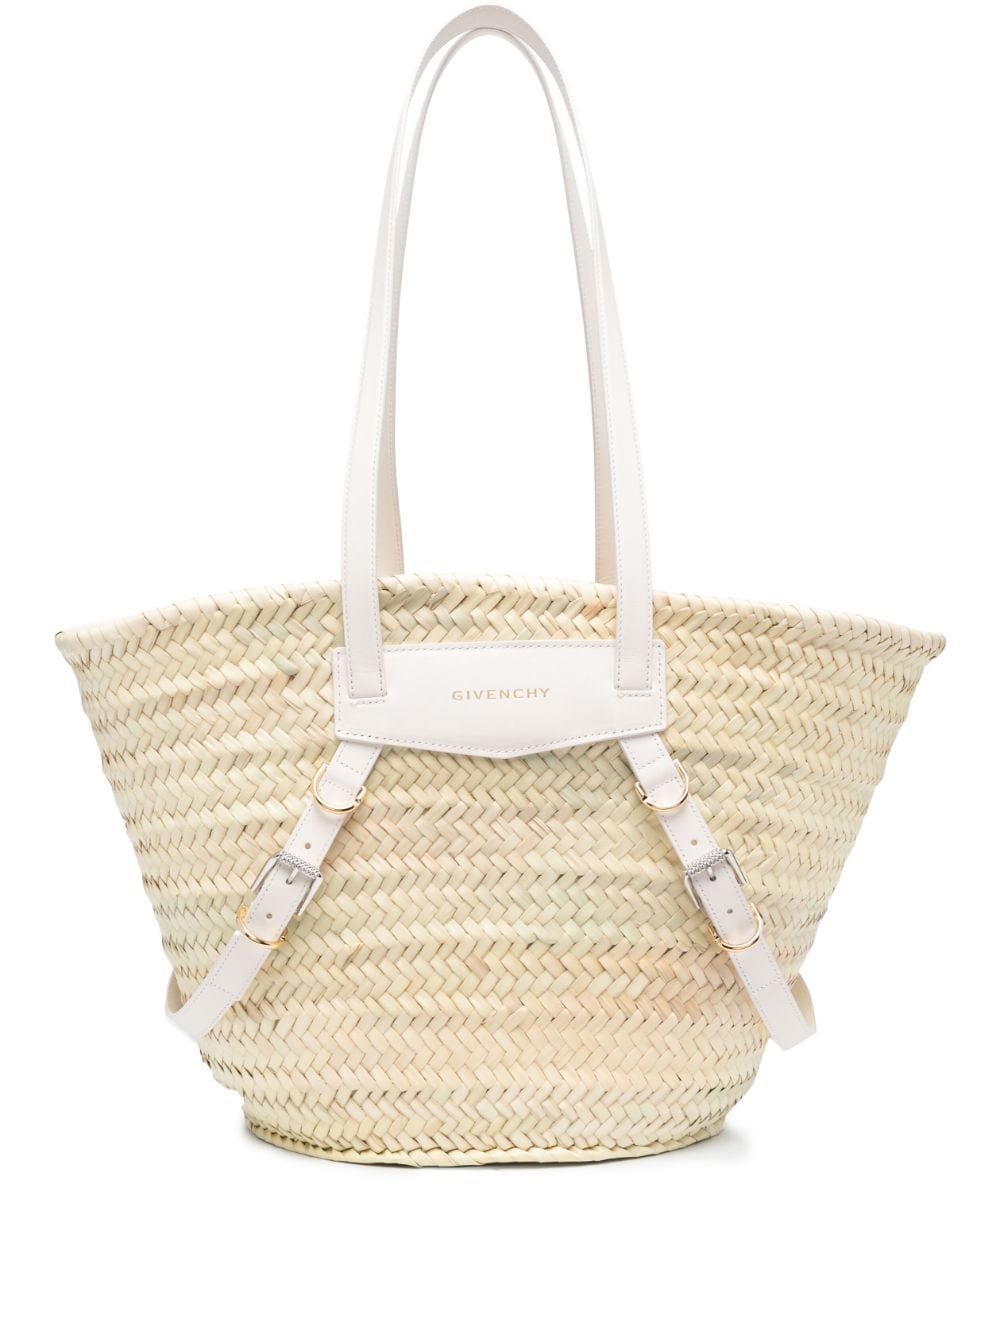 GIVENCHY White Raffia and Leather Medium Tote with Embossed Logo